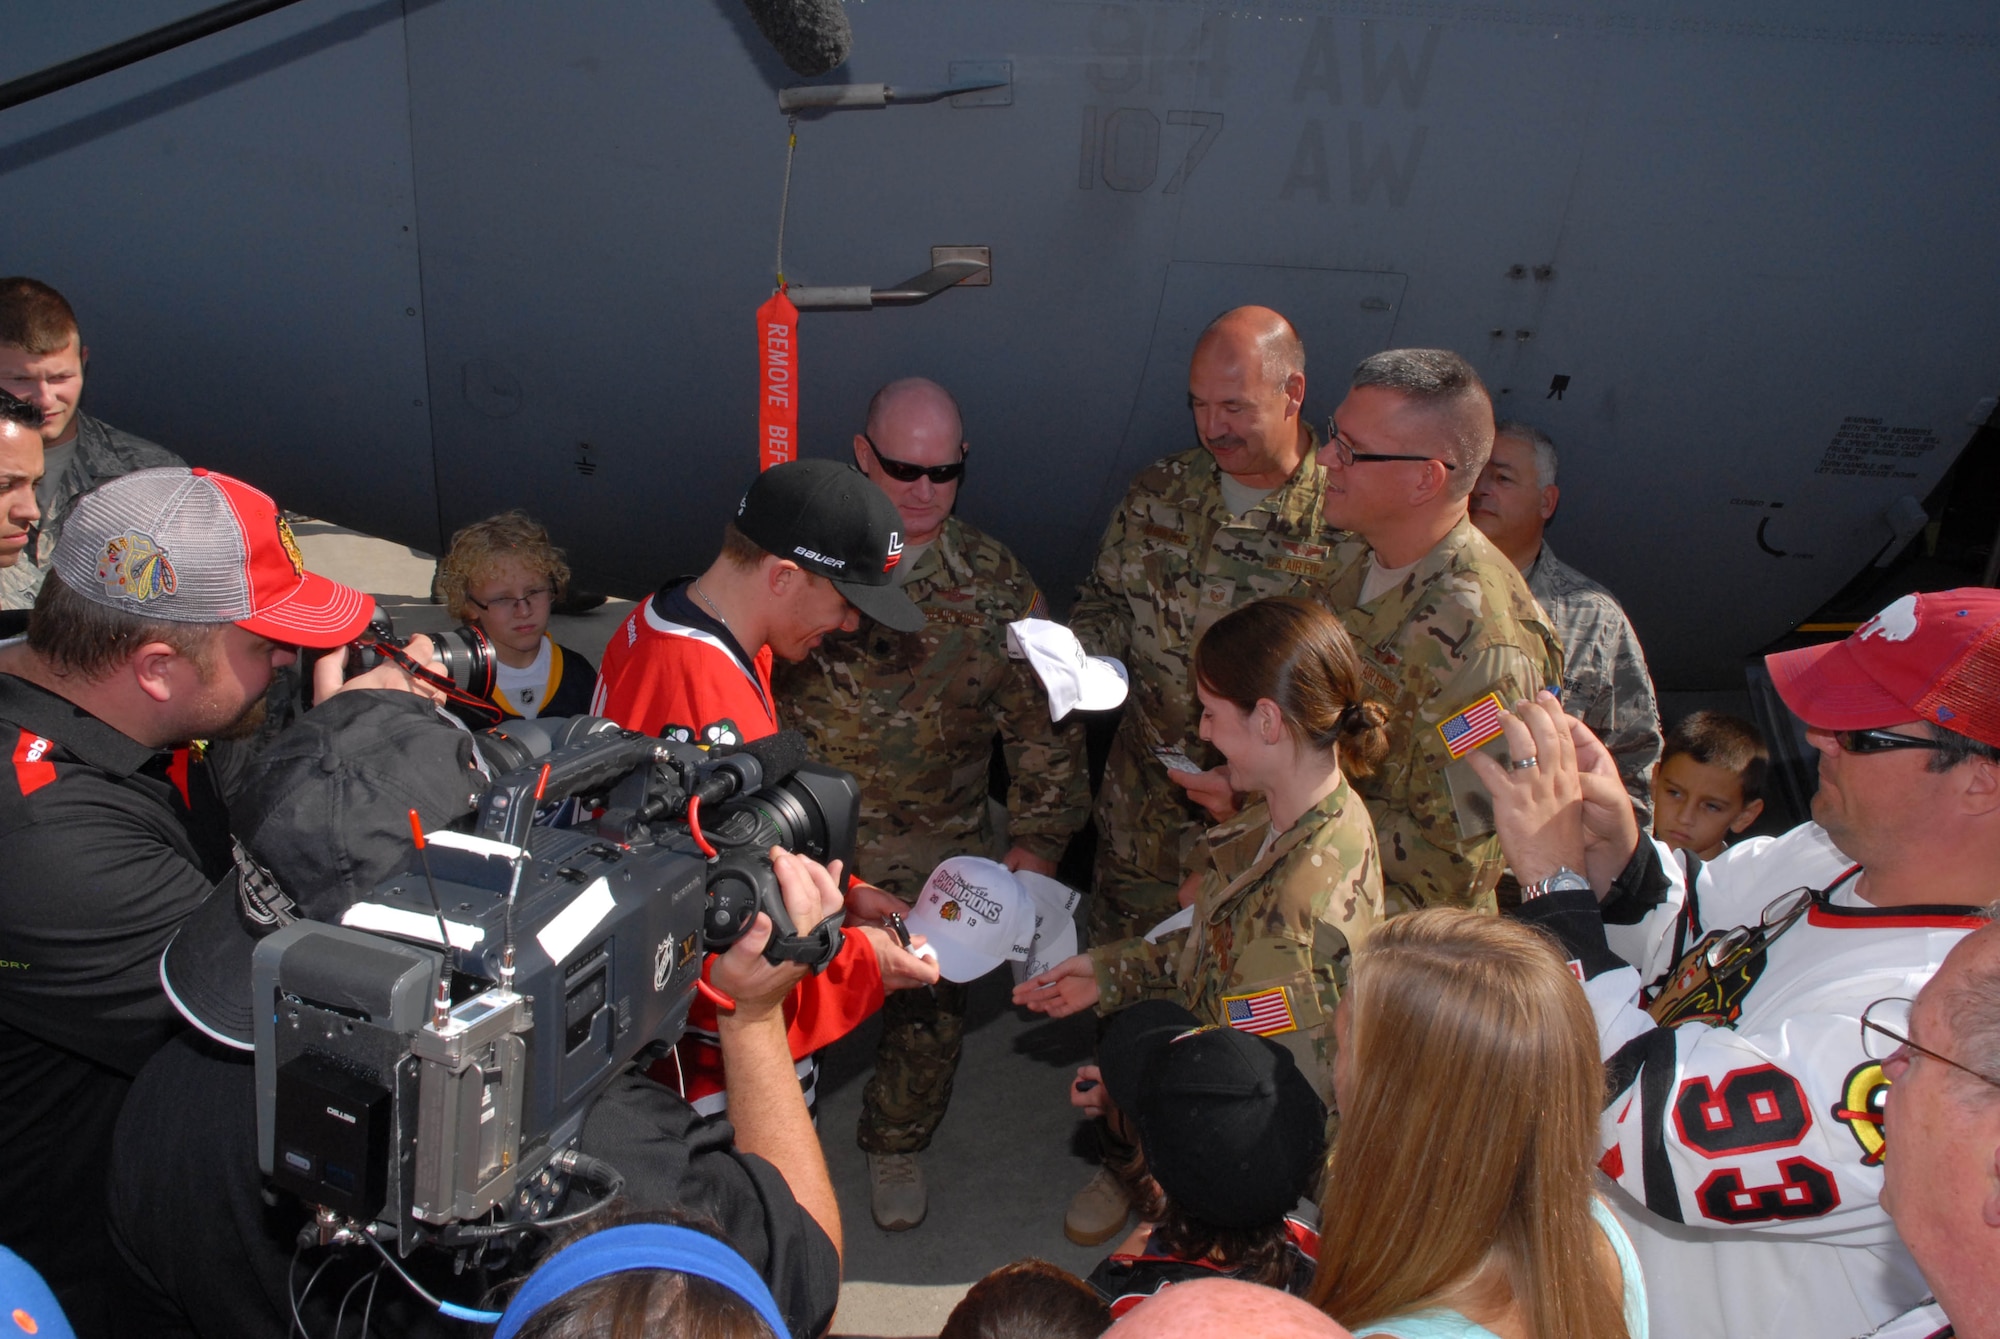 Members of the Niagara Falls Air Reserve Station meets Kane, as well as have photographs taken with the Stanley Cup and Conn Smythe trophy. Patrick Kane signs hats for 107th Airlift Wing on Aug.24, 2013. (Air National Guard Photo/ Senior Master Sgt. Stephan Kovacs)